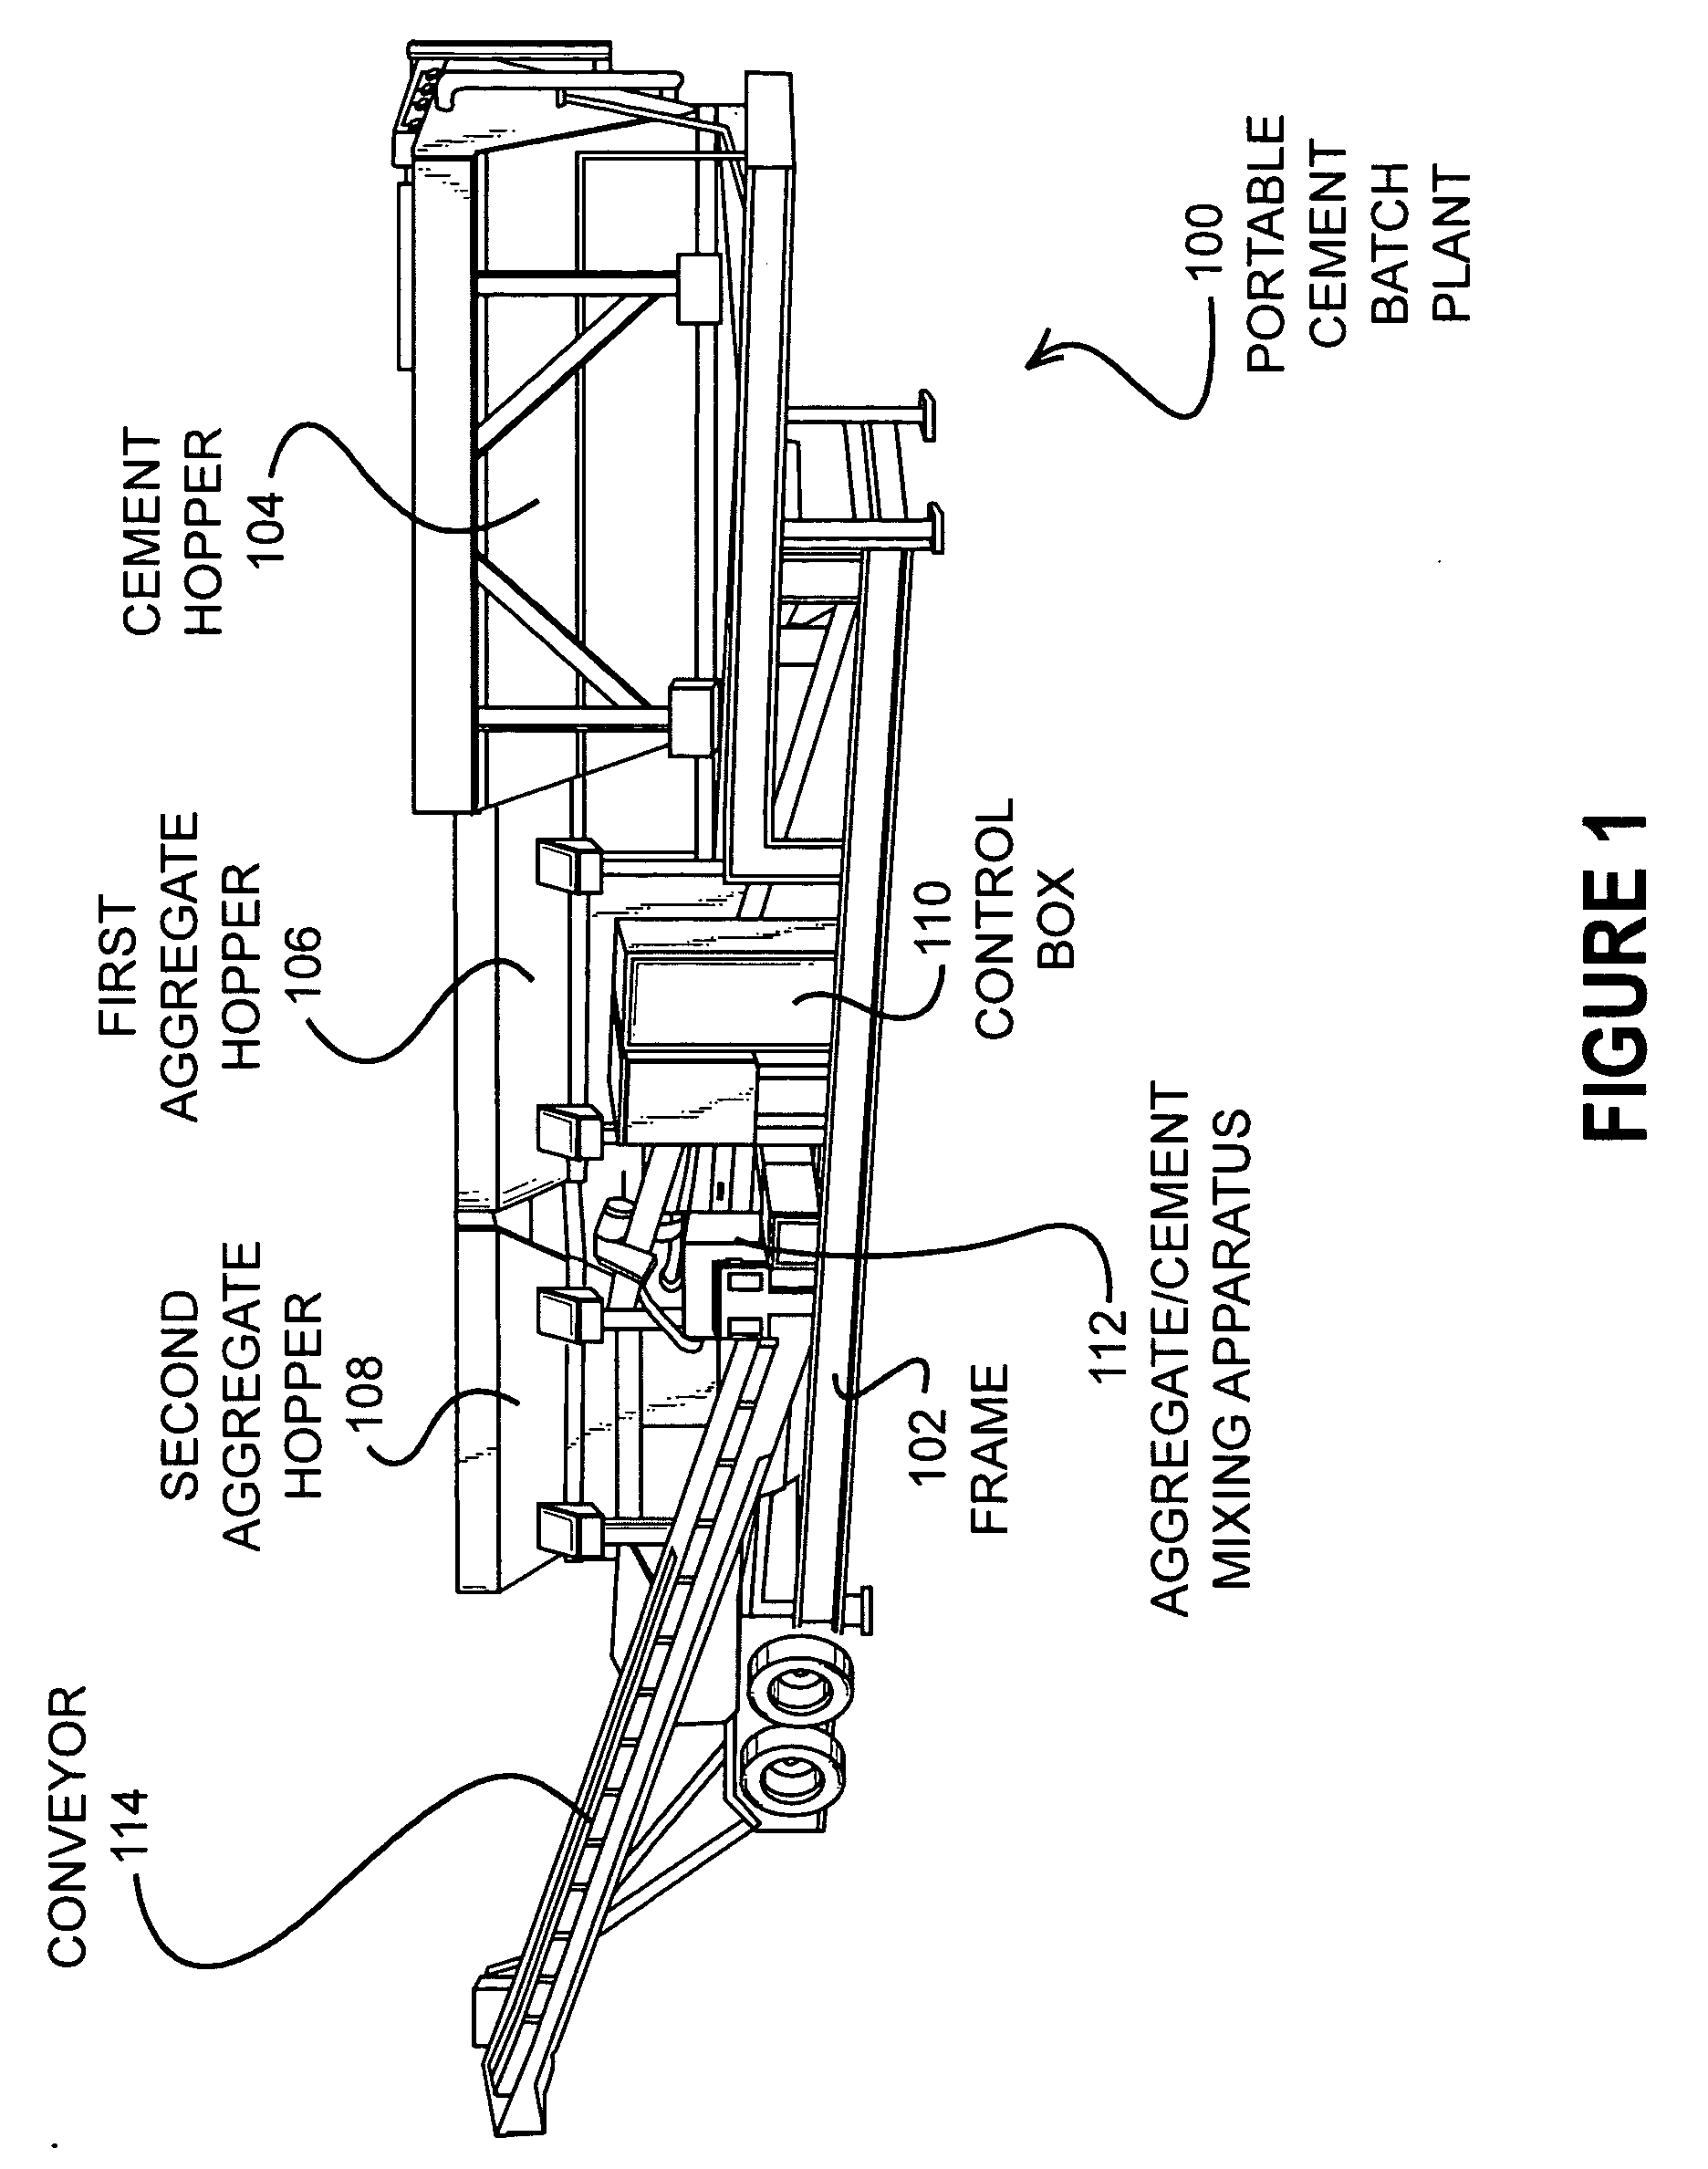 Chemical dispensing system for a portable concrete plant